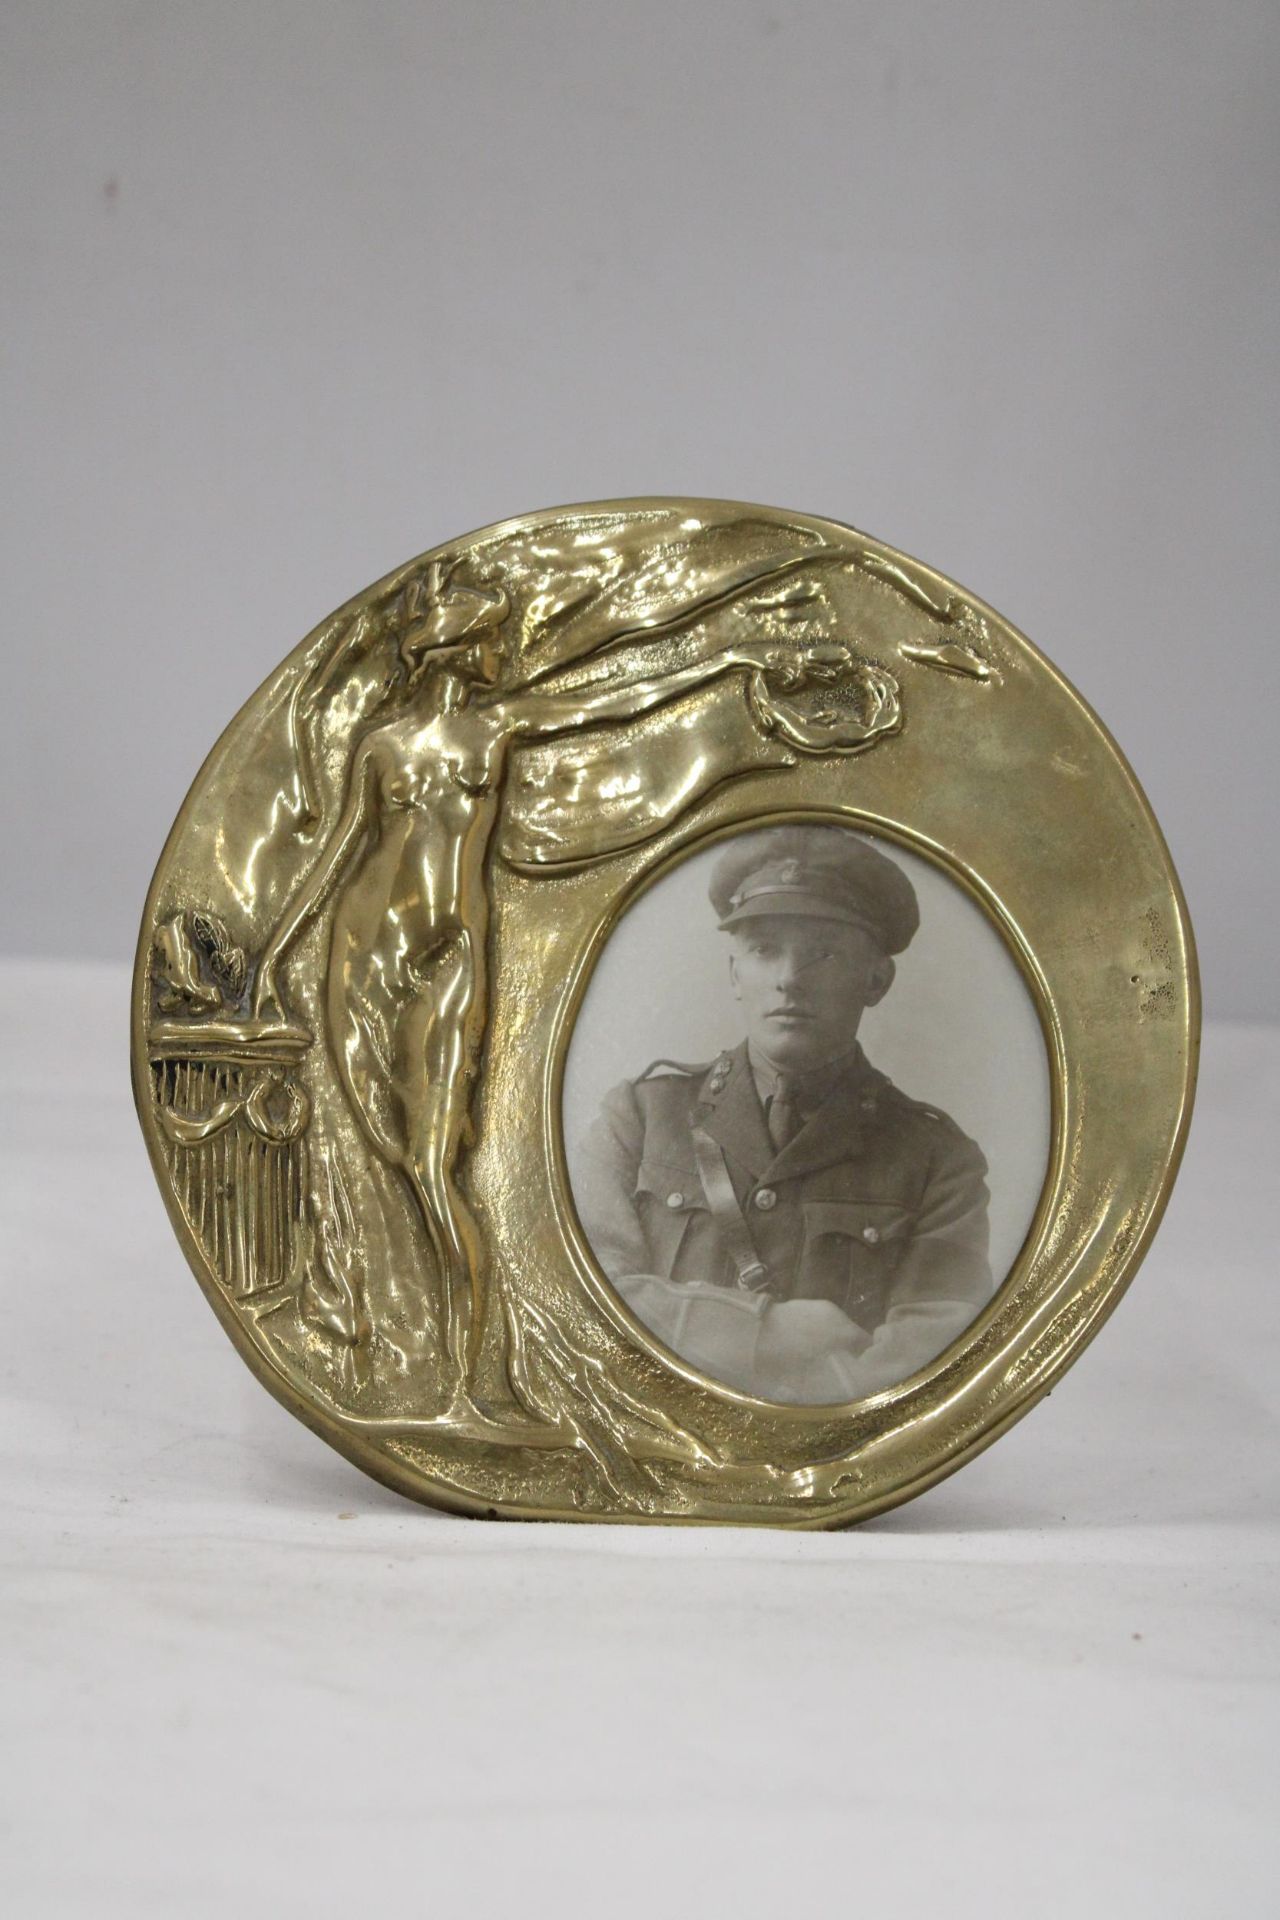 A WW1 DEATH PENNY BRASS FRAME WITH A PHOTO OF AN INFANTRY MAN - Image 2 of 4